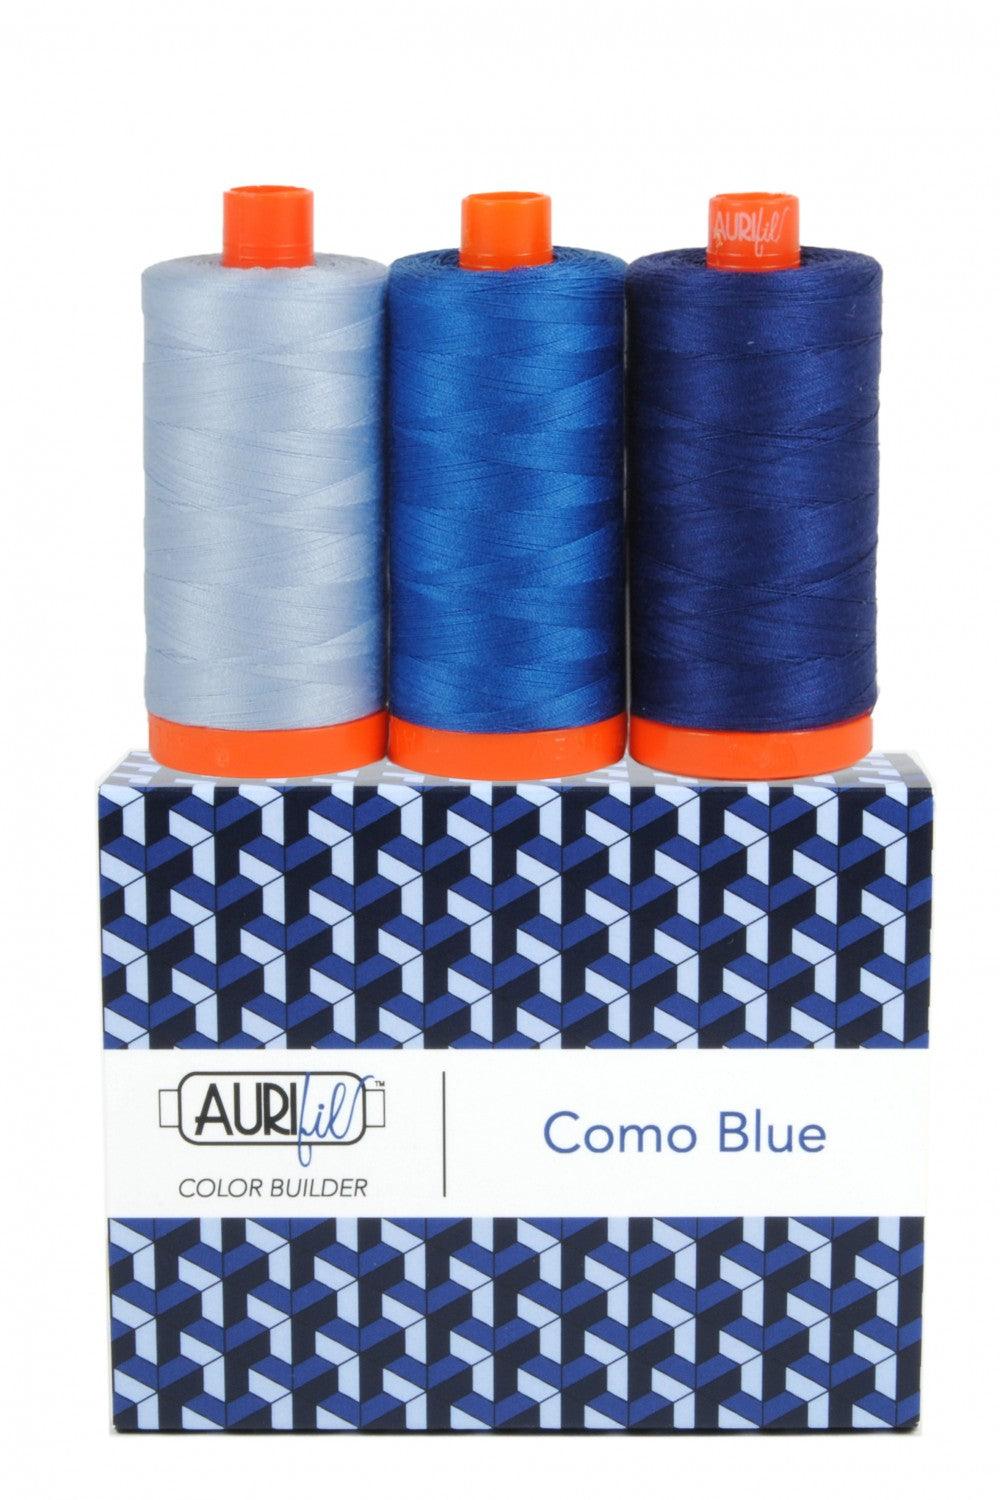 Como Blue, Color Builder, Aurifil, 1300m, Package of 3 - Kawartha Quilting and Sewing LTD.